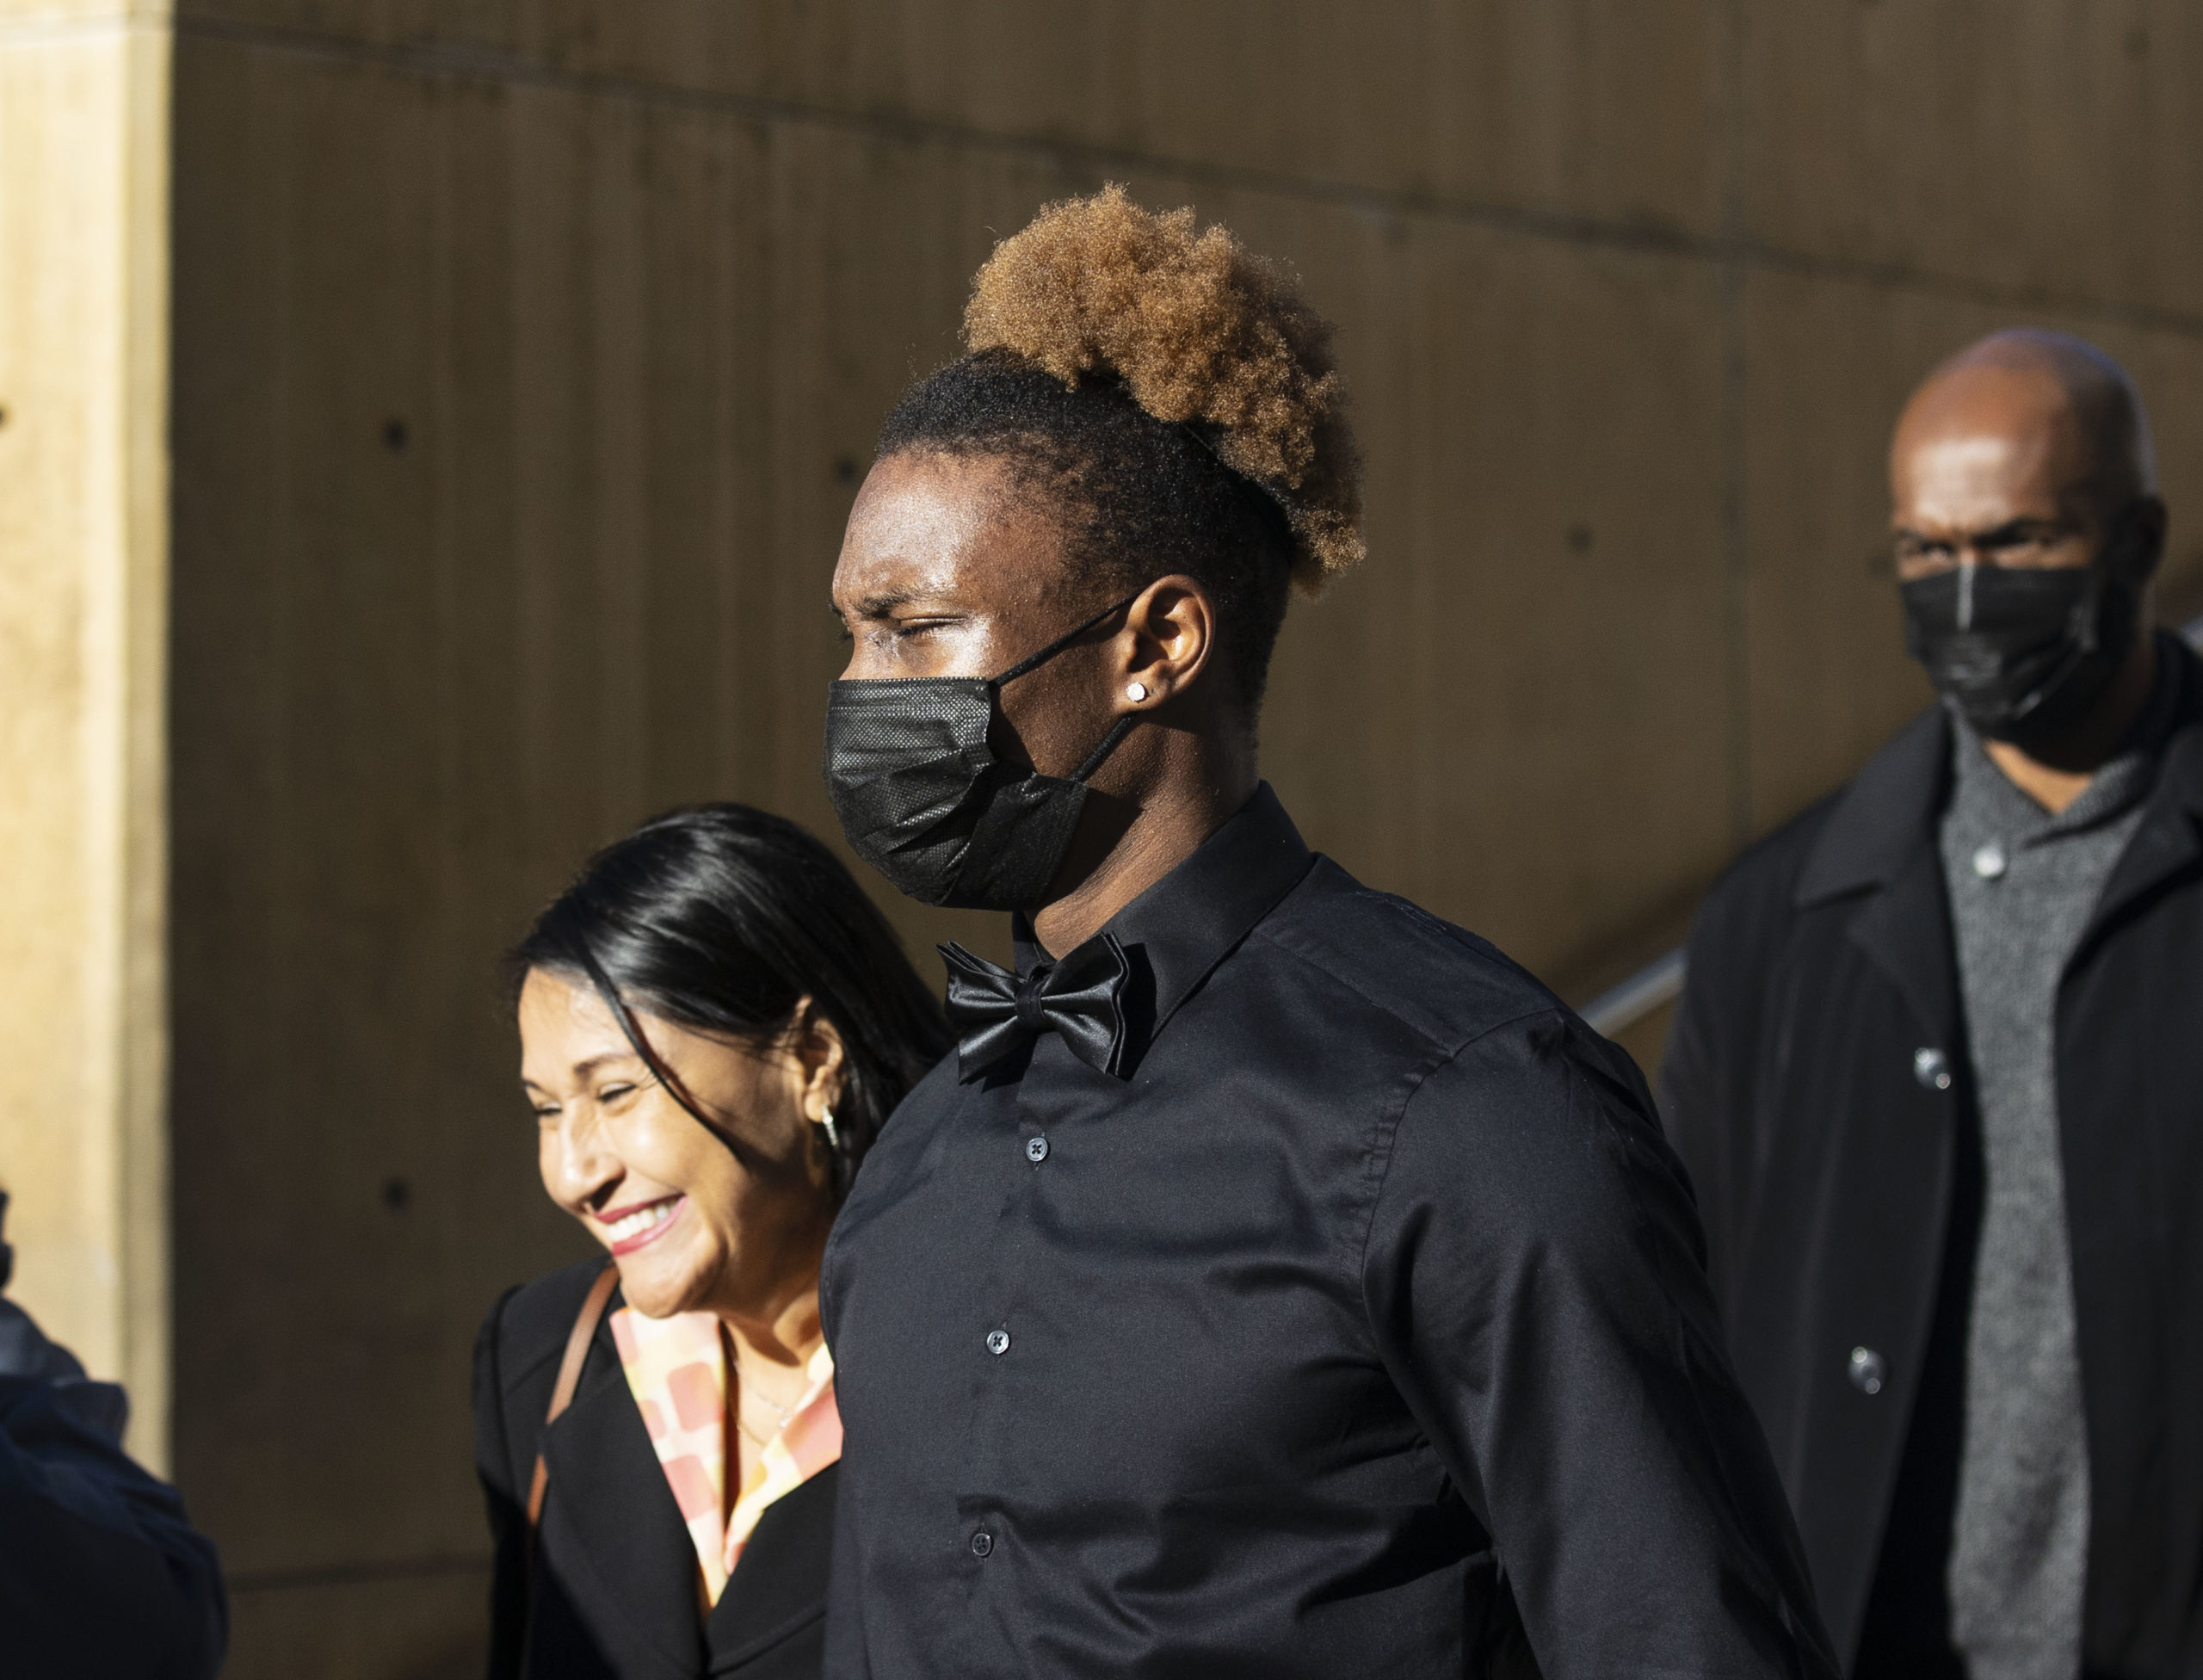 LAS VEGAS, NEVADA - NOVEMBER 22: Former Las Vegas Raiders player Henry Ruggs III leaves court after an appearance at the Regional Justice Center on November 22, 2021 in Las Vegas, Nevada. Ruggs has been ordered to wear an ankle monitor to measure his alcohol level after he missed a court-ordered test. Ruggs faces DUI charges after a fatal car crash. Bizuayehu Tesfaye-Pool/Getty Images